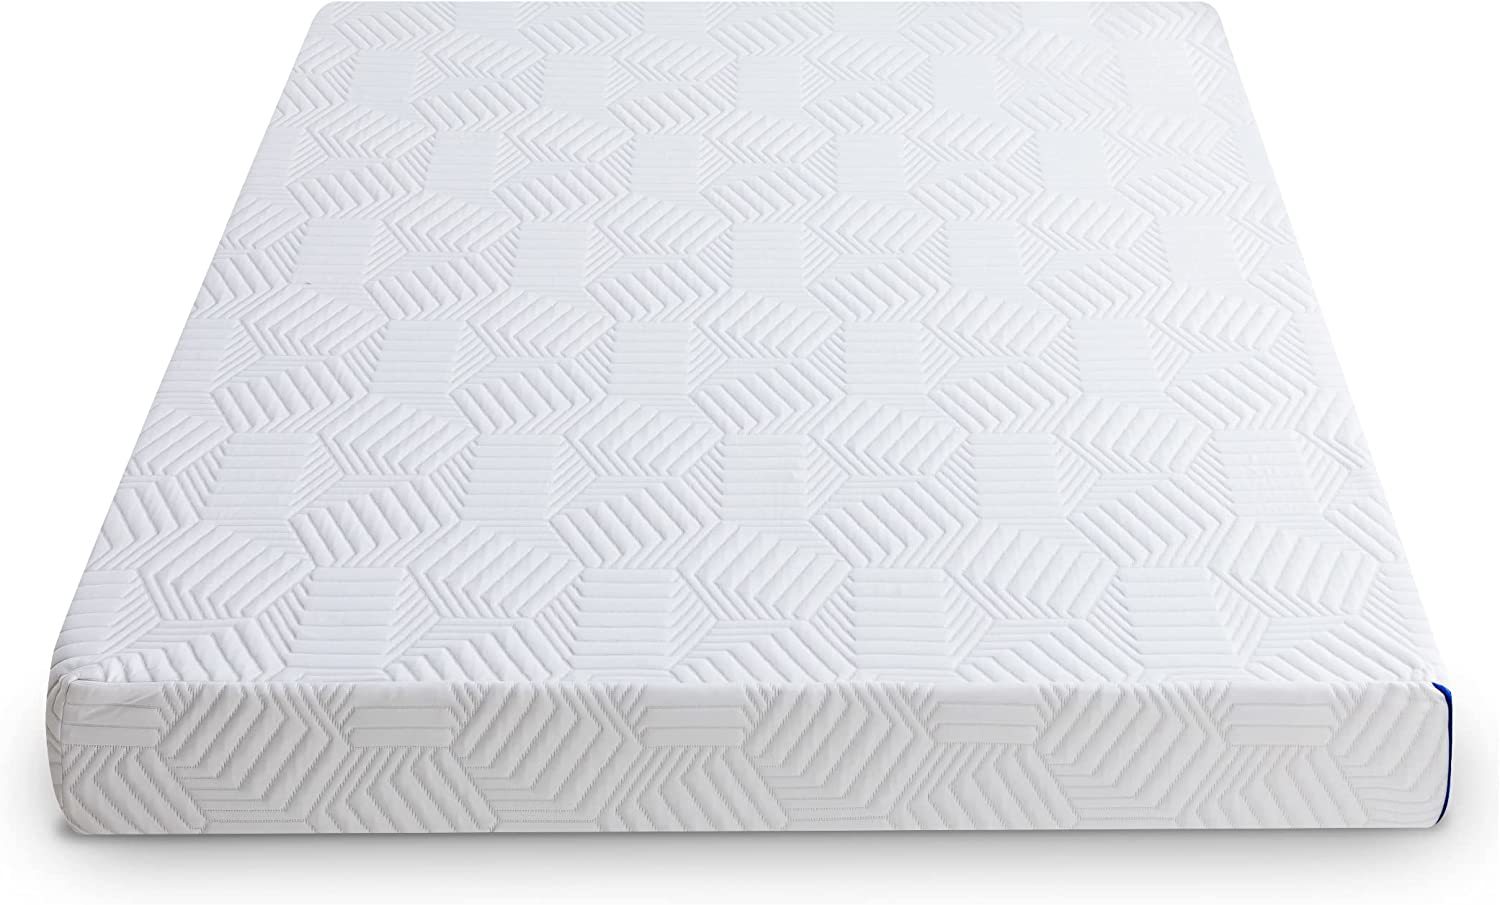 Primary image for Ego Blue 10 Inch California King Memory Foam Mattress, Bed In A Box,, White